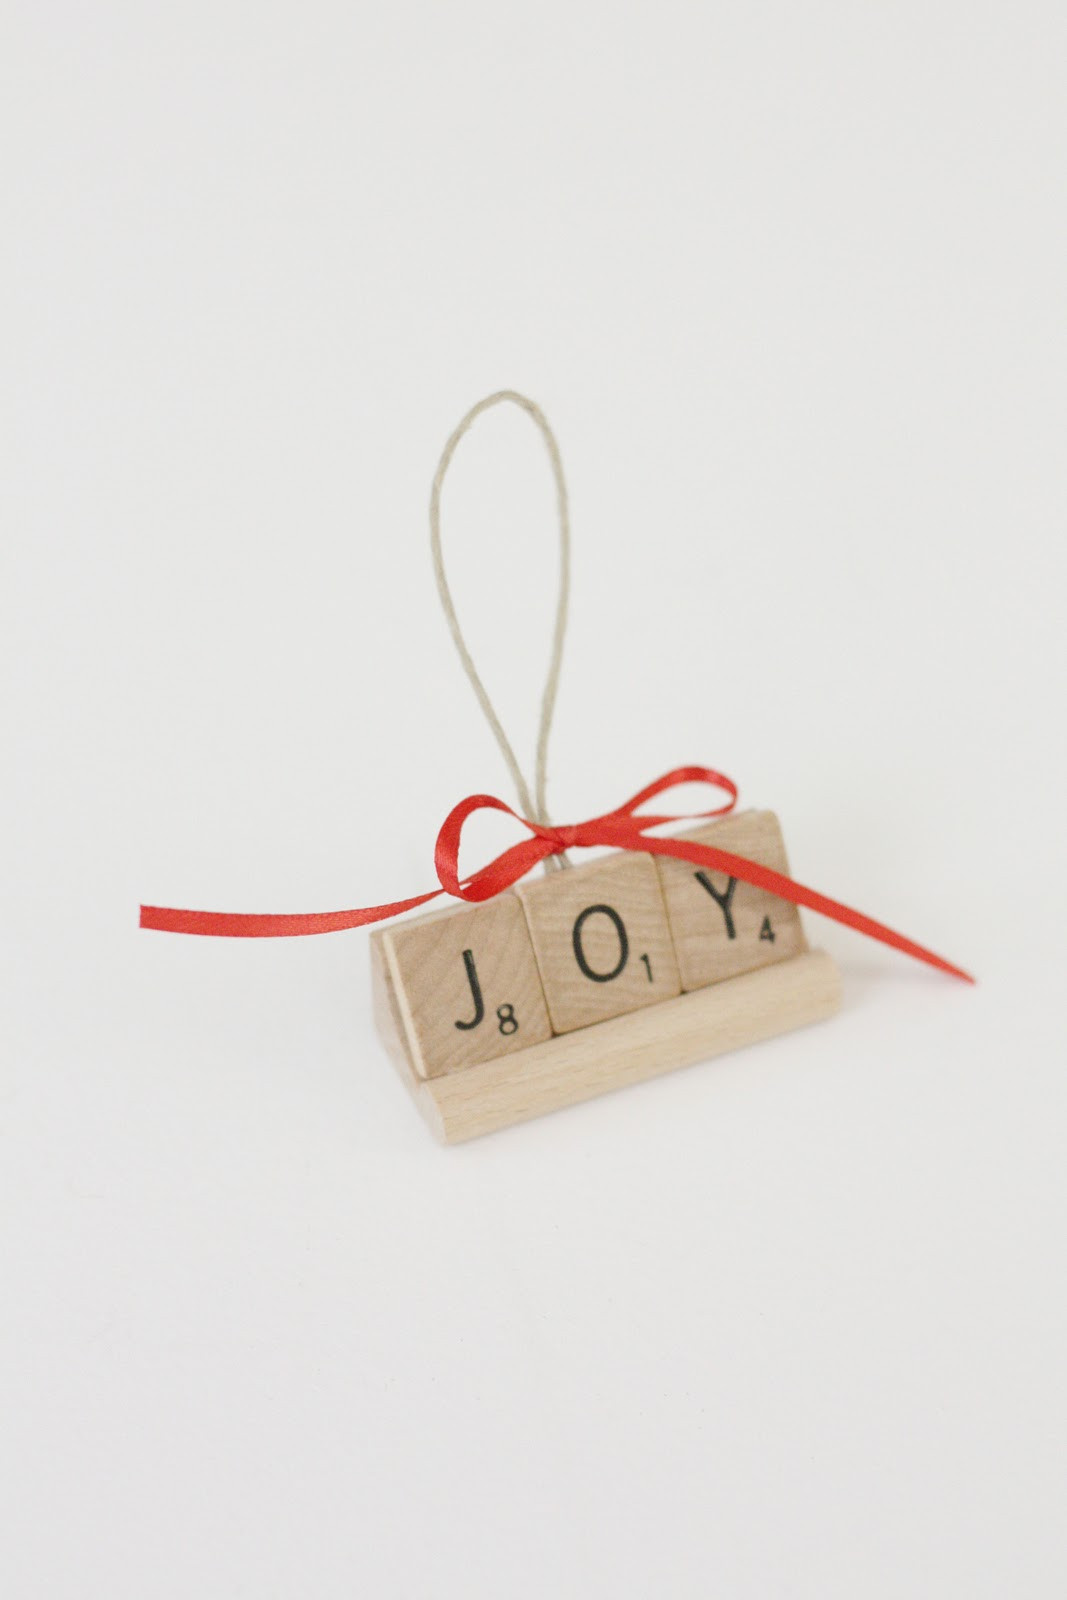 Scrabble Tile Christmas Ornaments
 our daily obsessions Christmas scrabble ornament